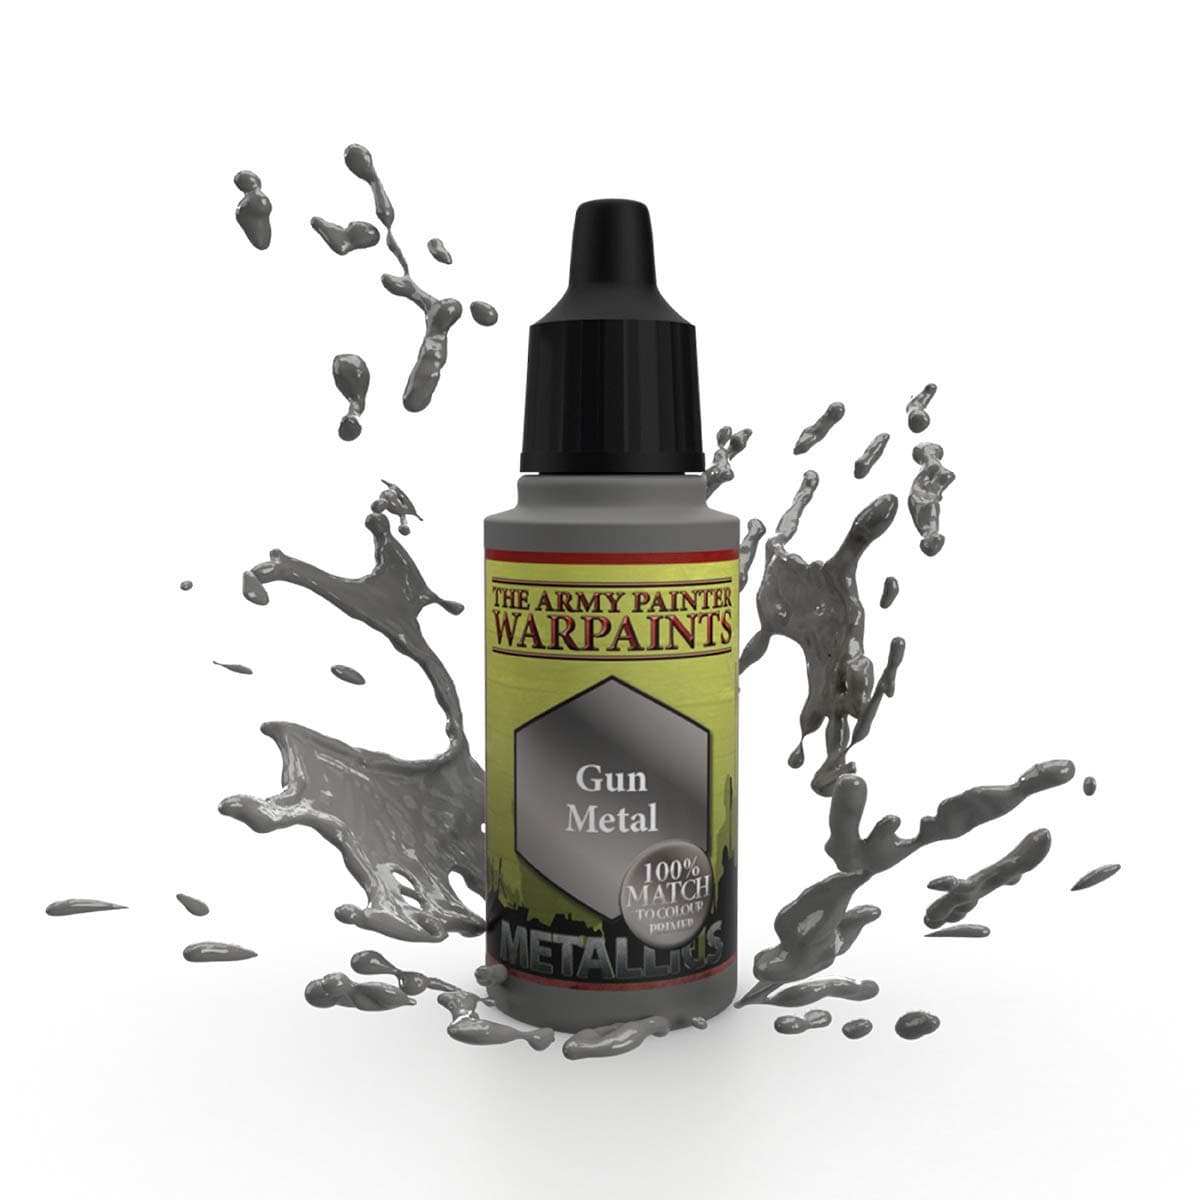 The Army Painter Accessories The Army Painter Warpaints: Gun Metal 18ml